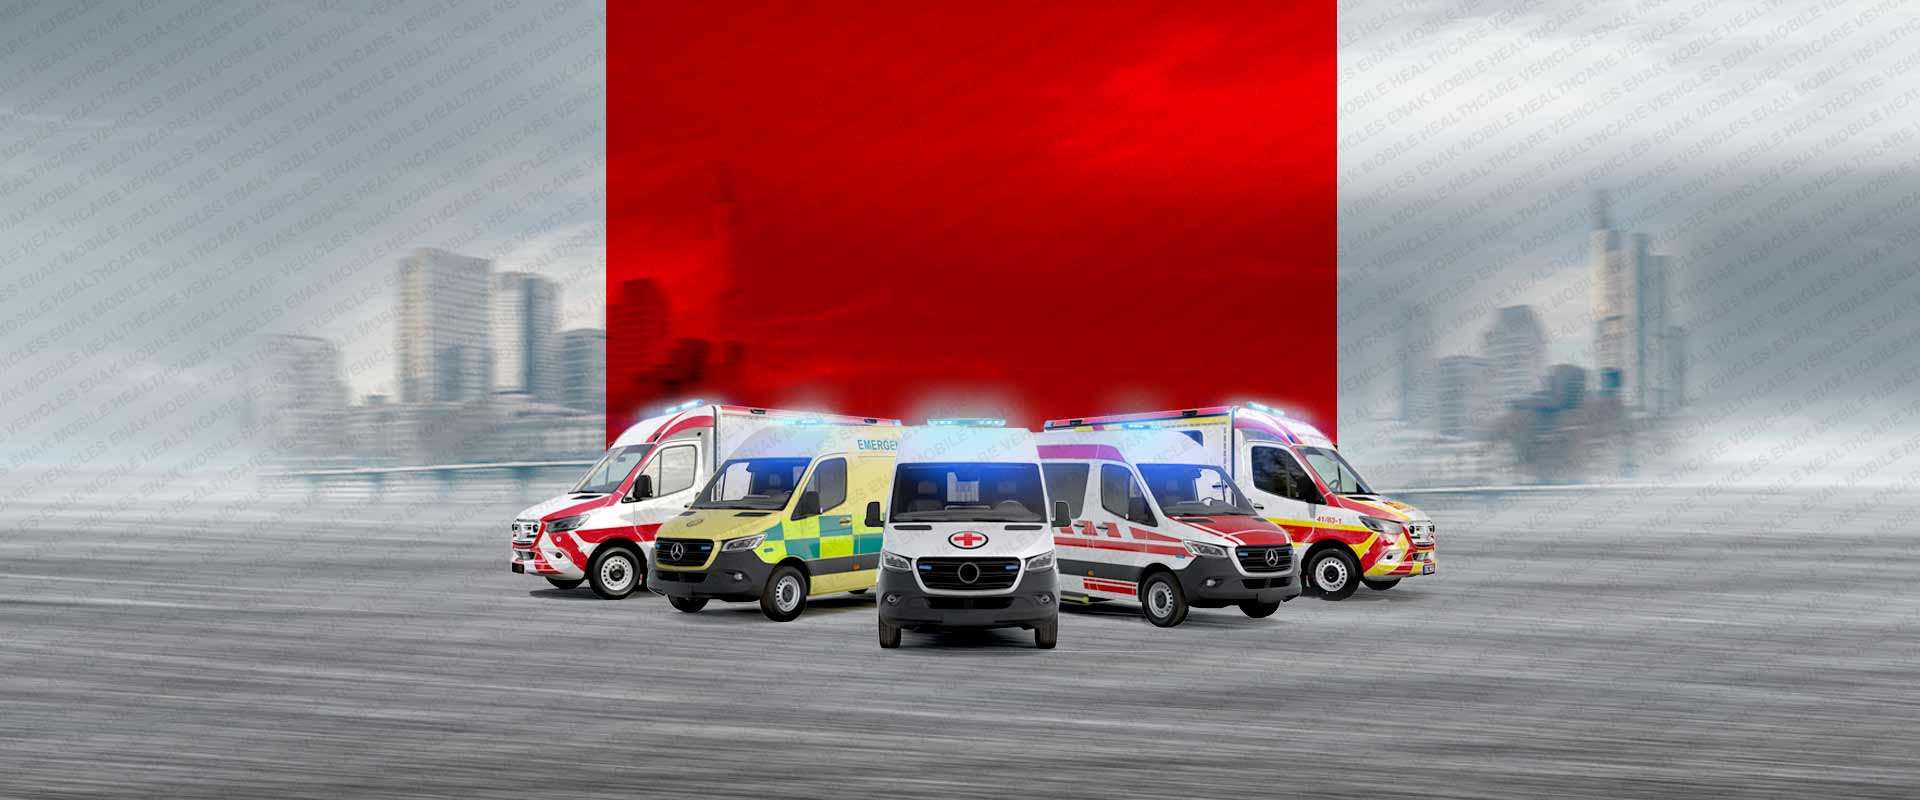 ENAK Ambulances is manufactured with the best quality.